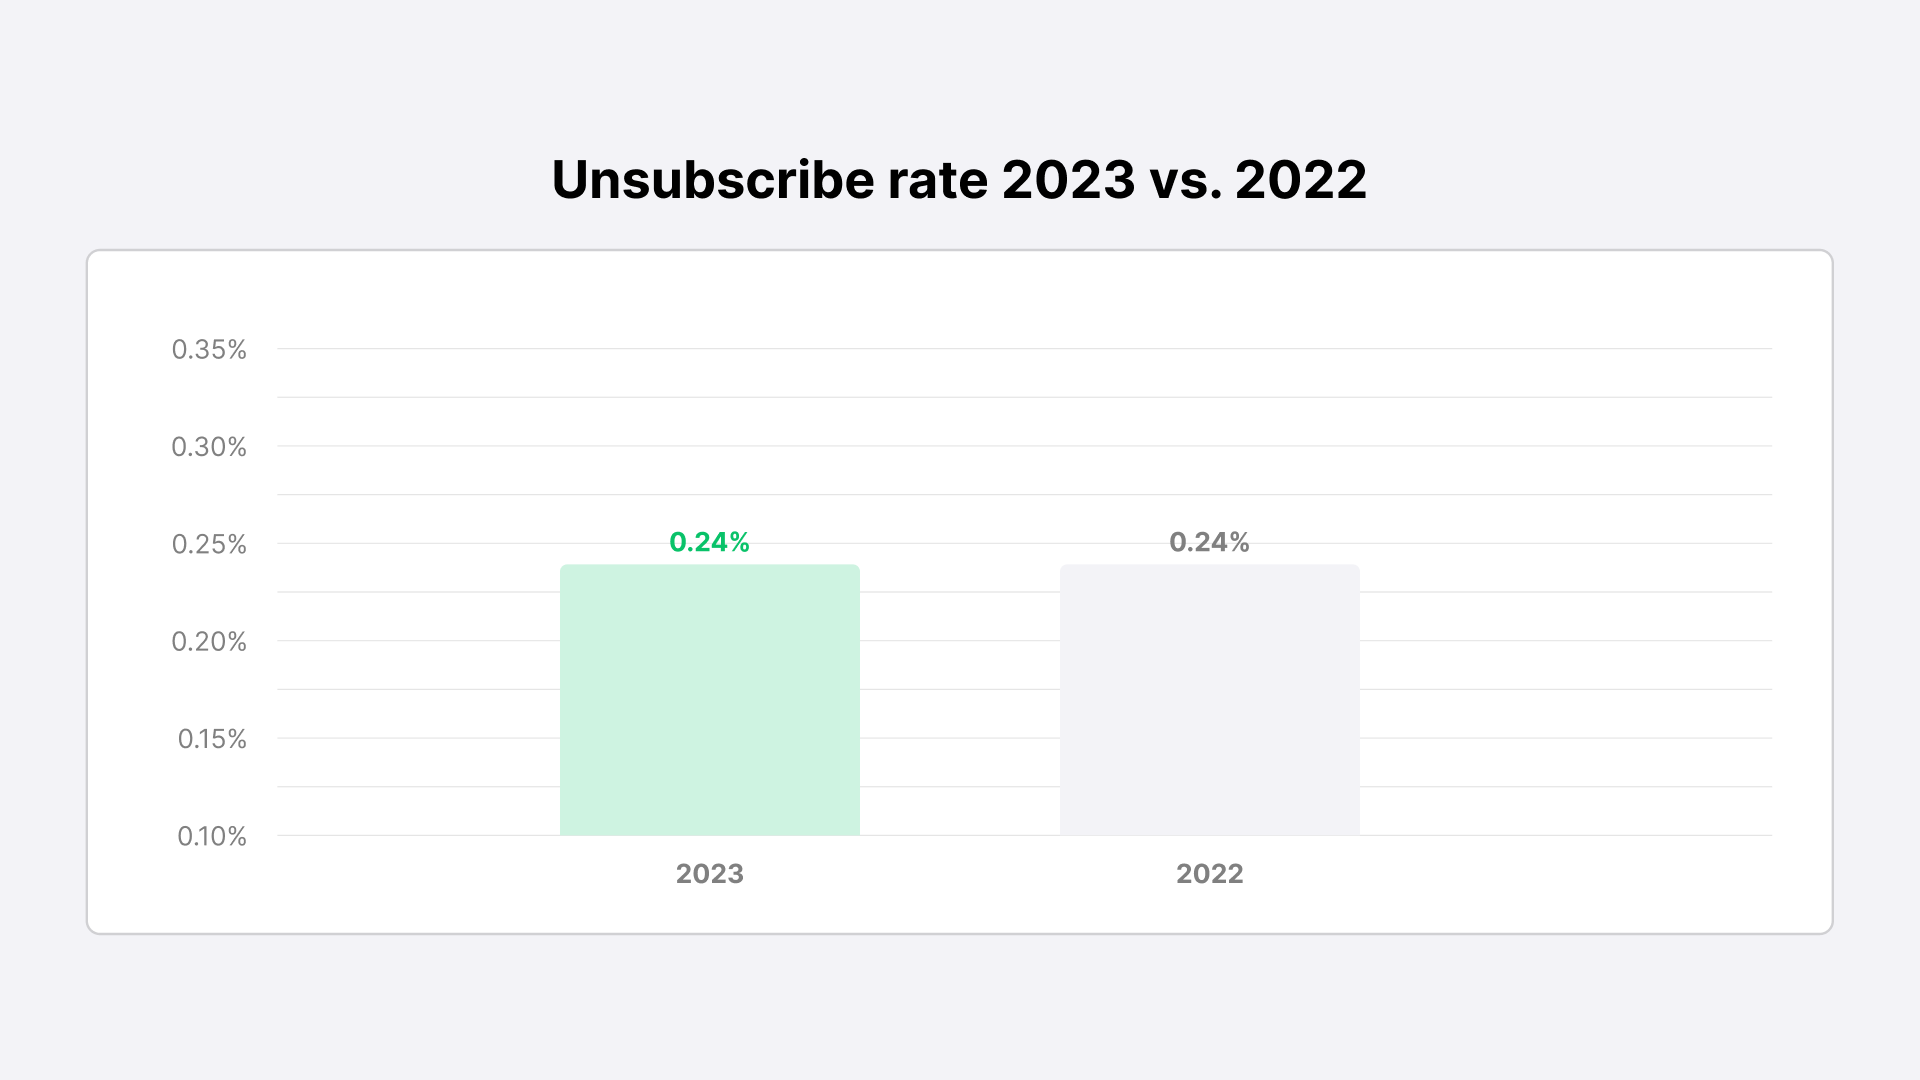 Email unsubscribe rate 2022 vs. 2023